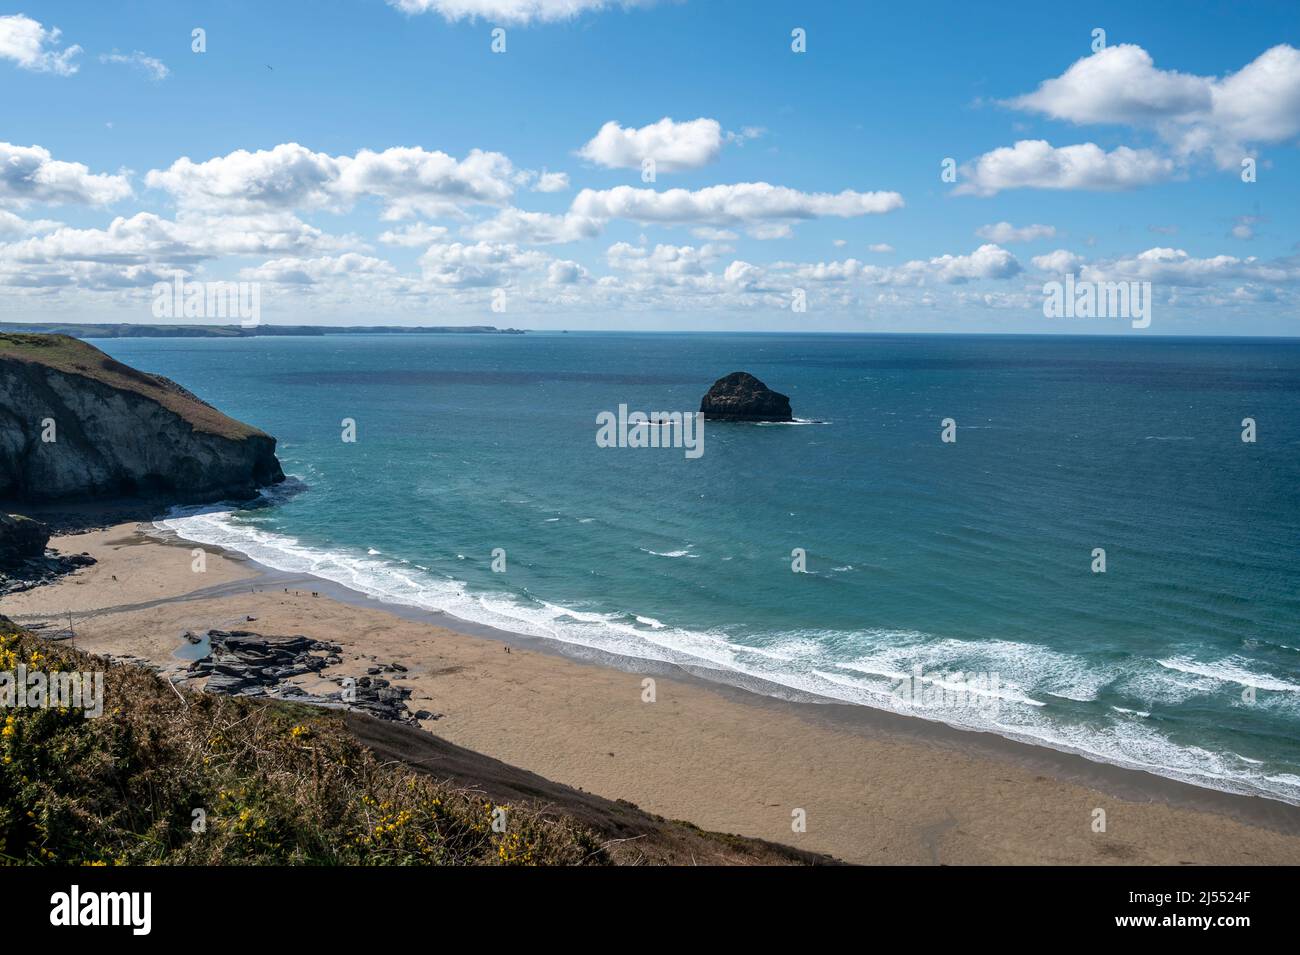 The golden sands of Trebarwith Strand beach, North Cornwall, UK with Gull Rock island, cliffs and turquoise sea. Stock Photo